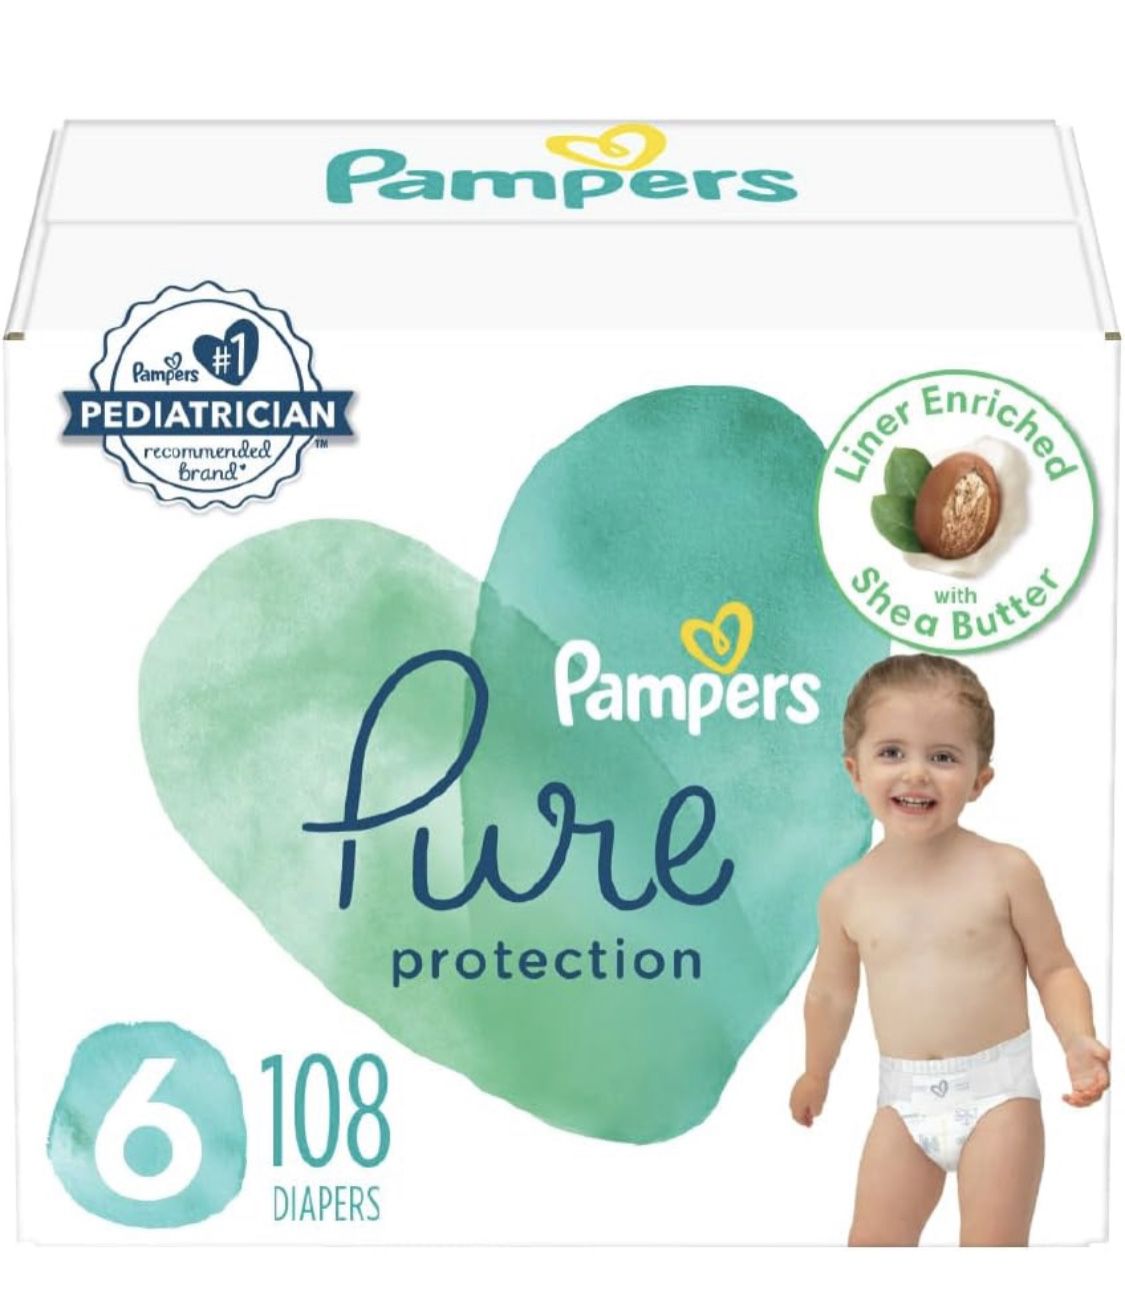 Unopened Pampers Pure Size 6 Diapers 